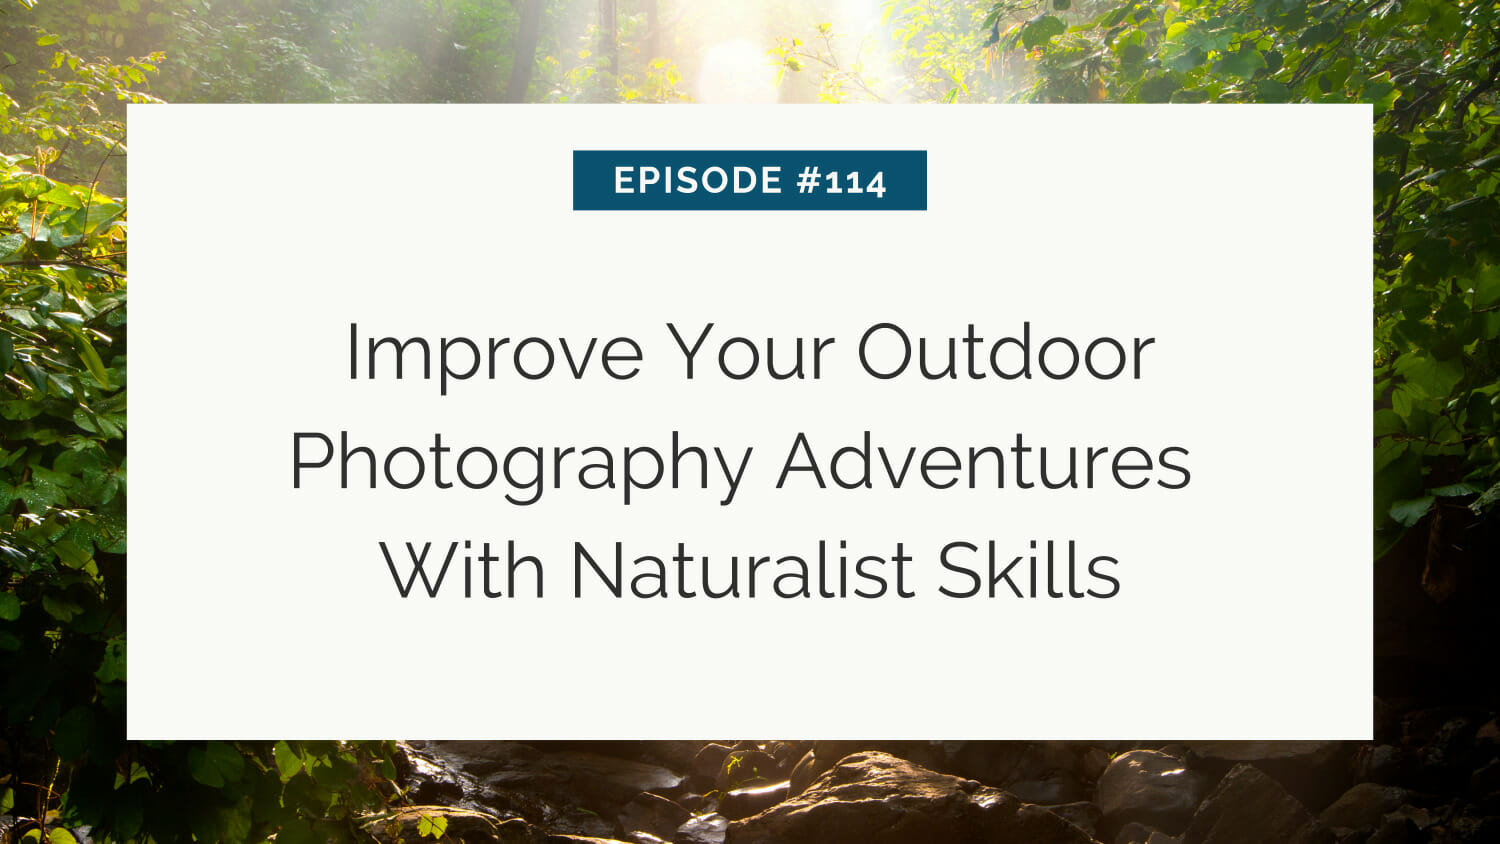 Title slide for episode #114 about enhancing outdoor photography with naturalist skills.